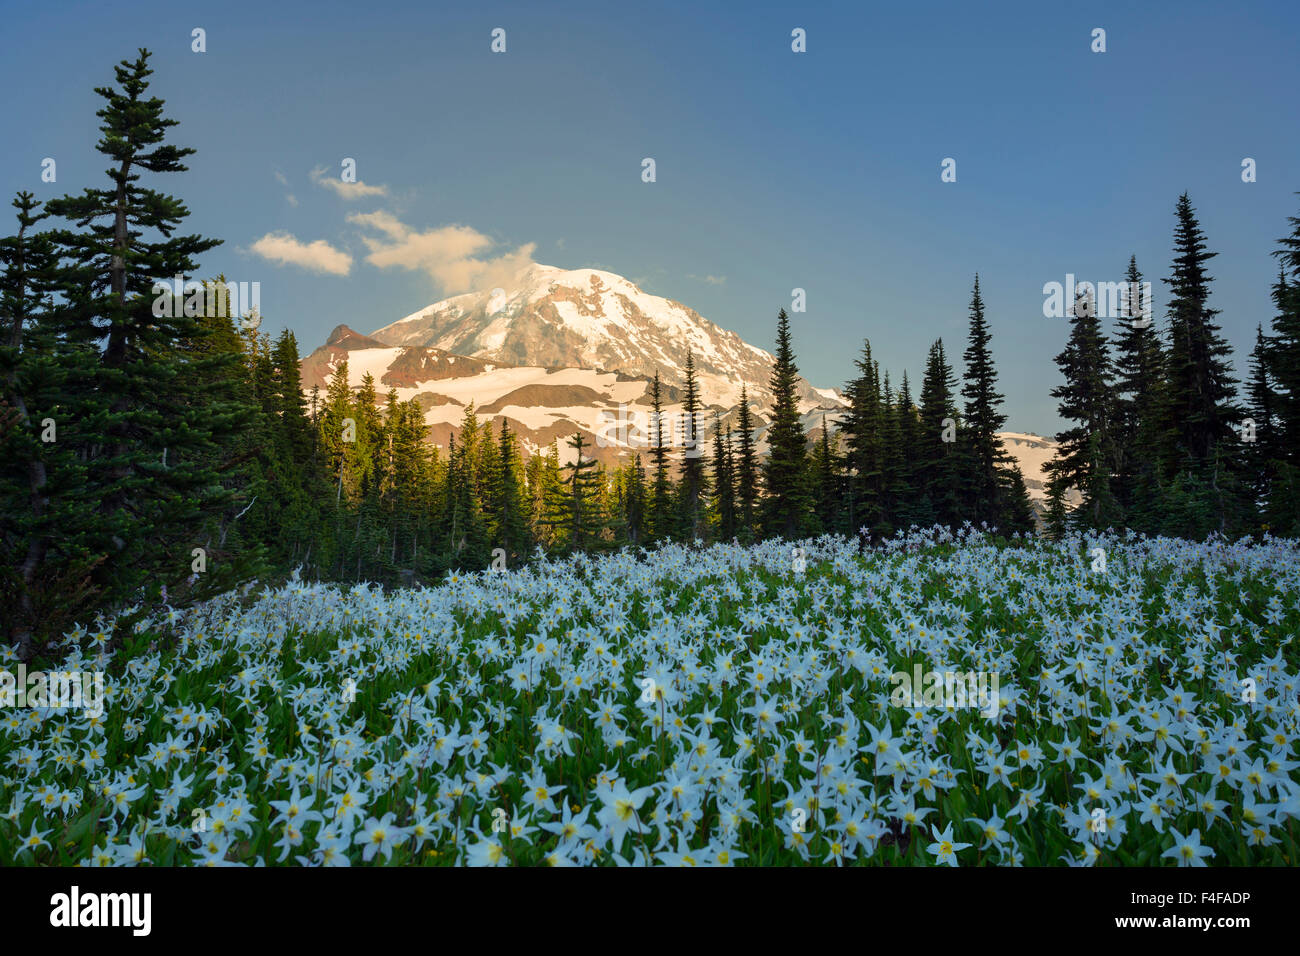 USA, Washington State. Field of White Avalanche Lily (Erythronium montanum) with Mt. Rainier in background at Spray Park, Mt. Rainier National Park. Stock Photo